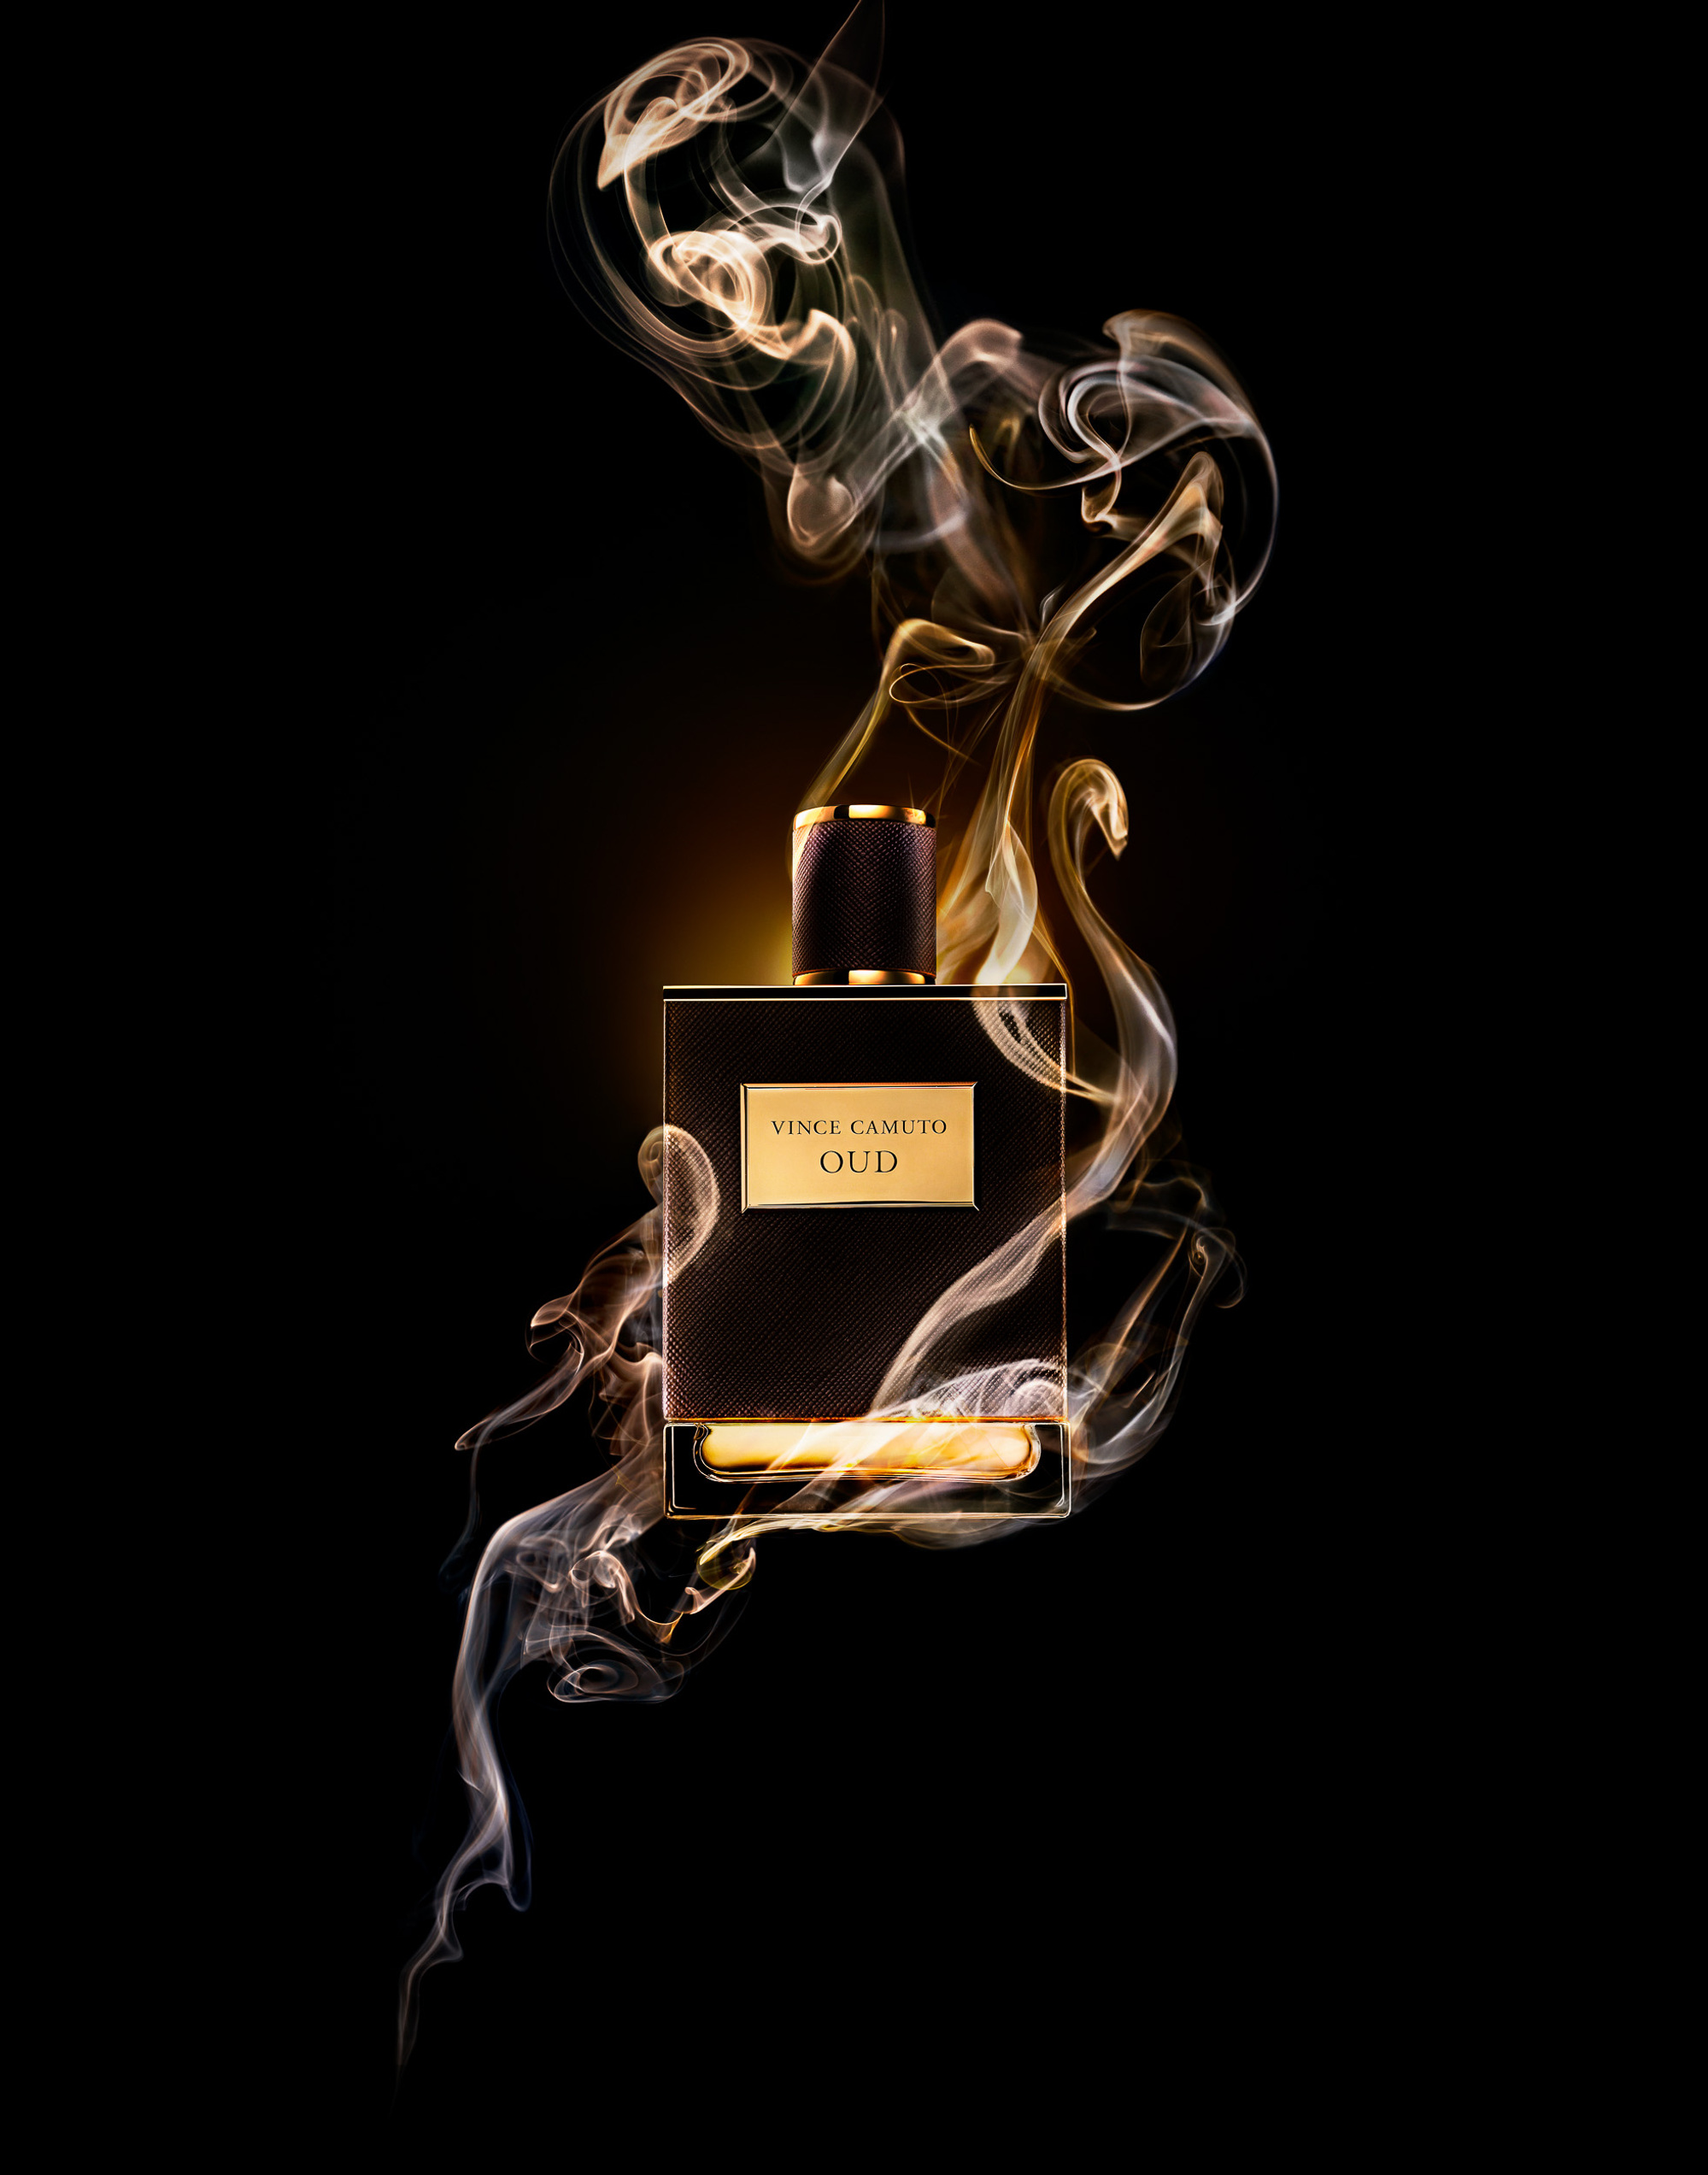 Vince Camuto Men Perfume & Fragrance photography by commercial, product & advertising photographer Timothy Hogan in the Los Angeles Studio